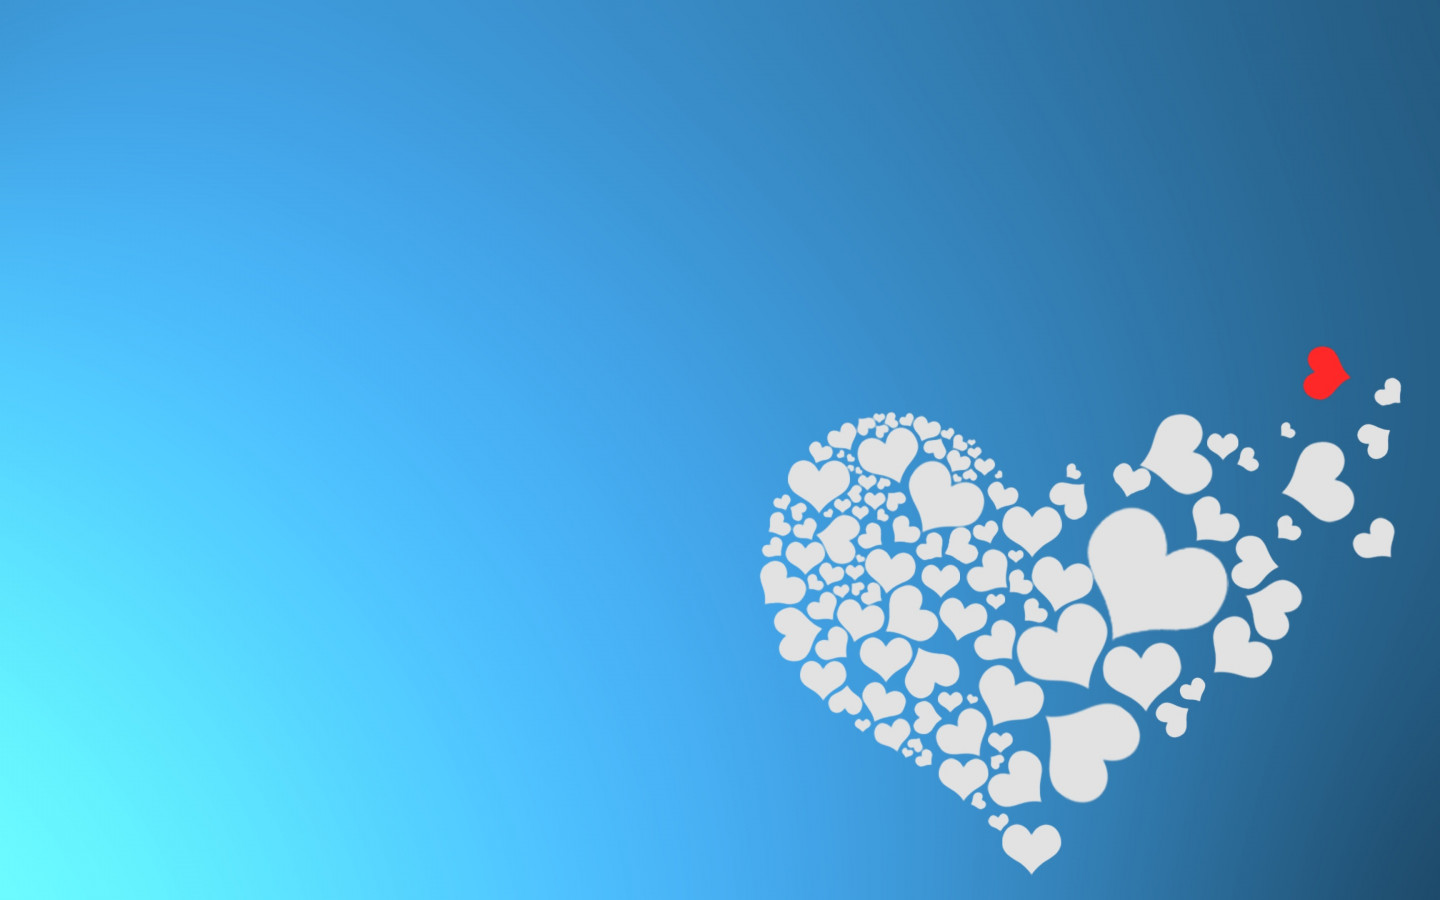 The hearts of love wallpaper 1440x900